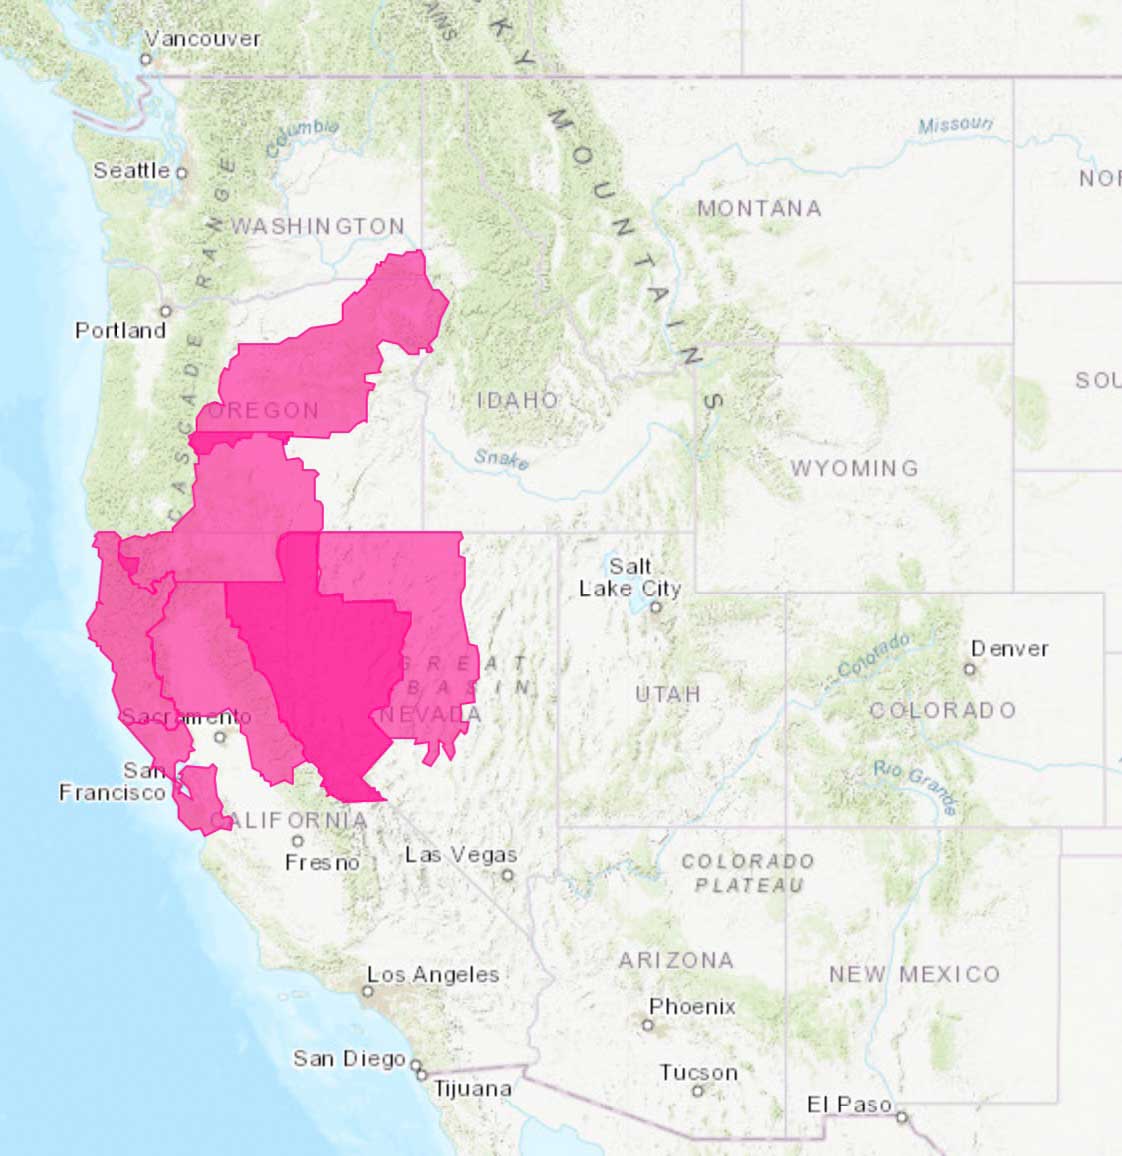 Red Flag Warnings for August 24, 2020 fire